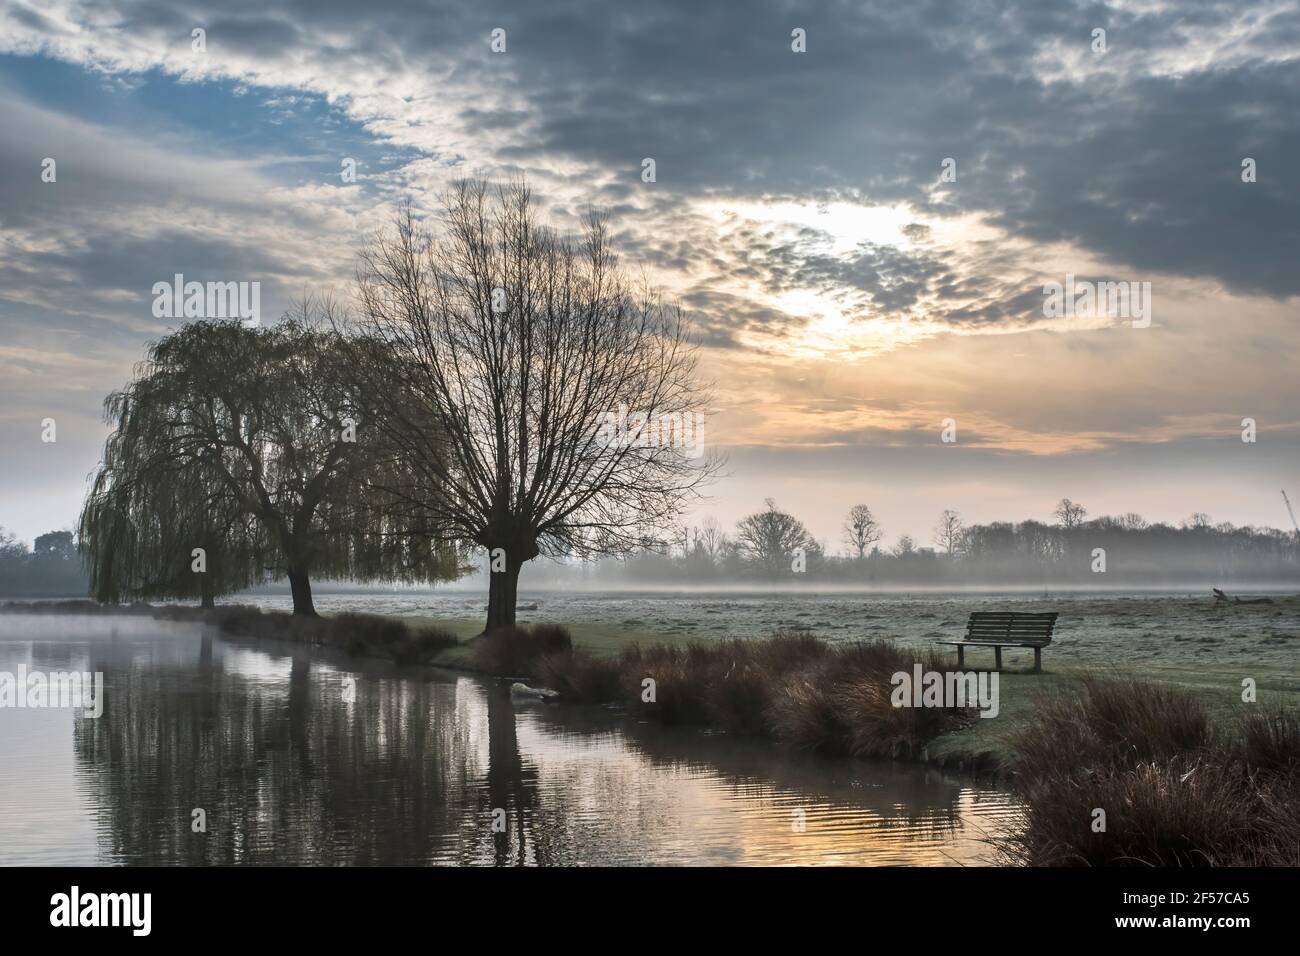 the wonders of nature are so beautiful on an early misty morning at Bushy Park. When on public or private  property I am prepared to take full respons Stock Photo